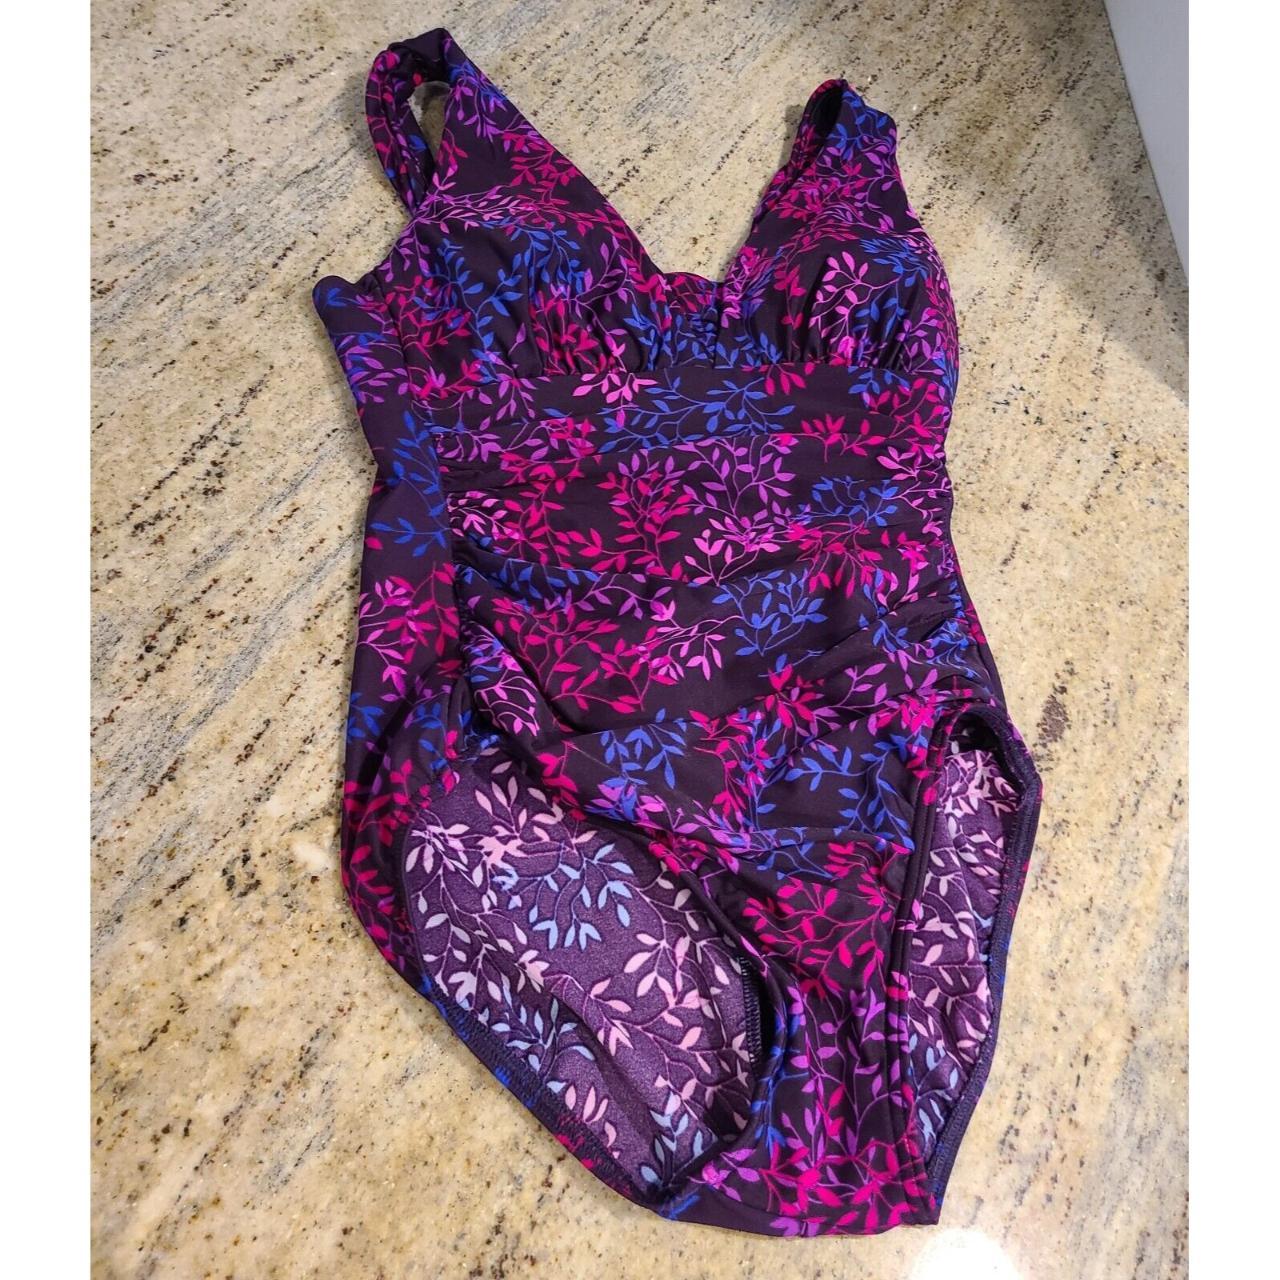 Lands End One Piece Swimsuit Size 6 Gathered Tummy... - Depop